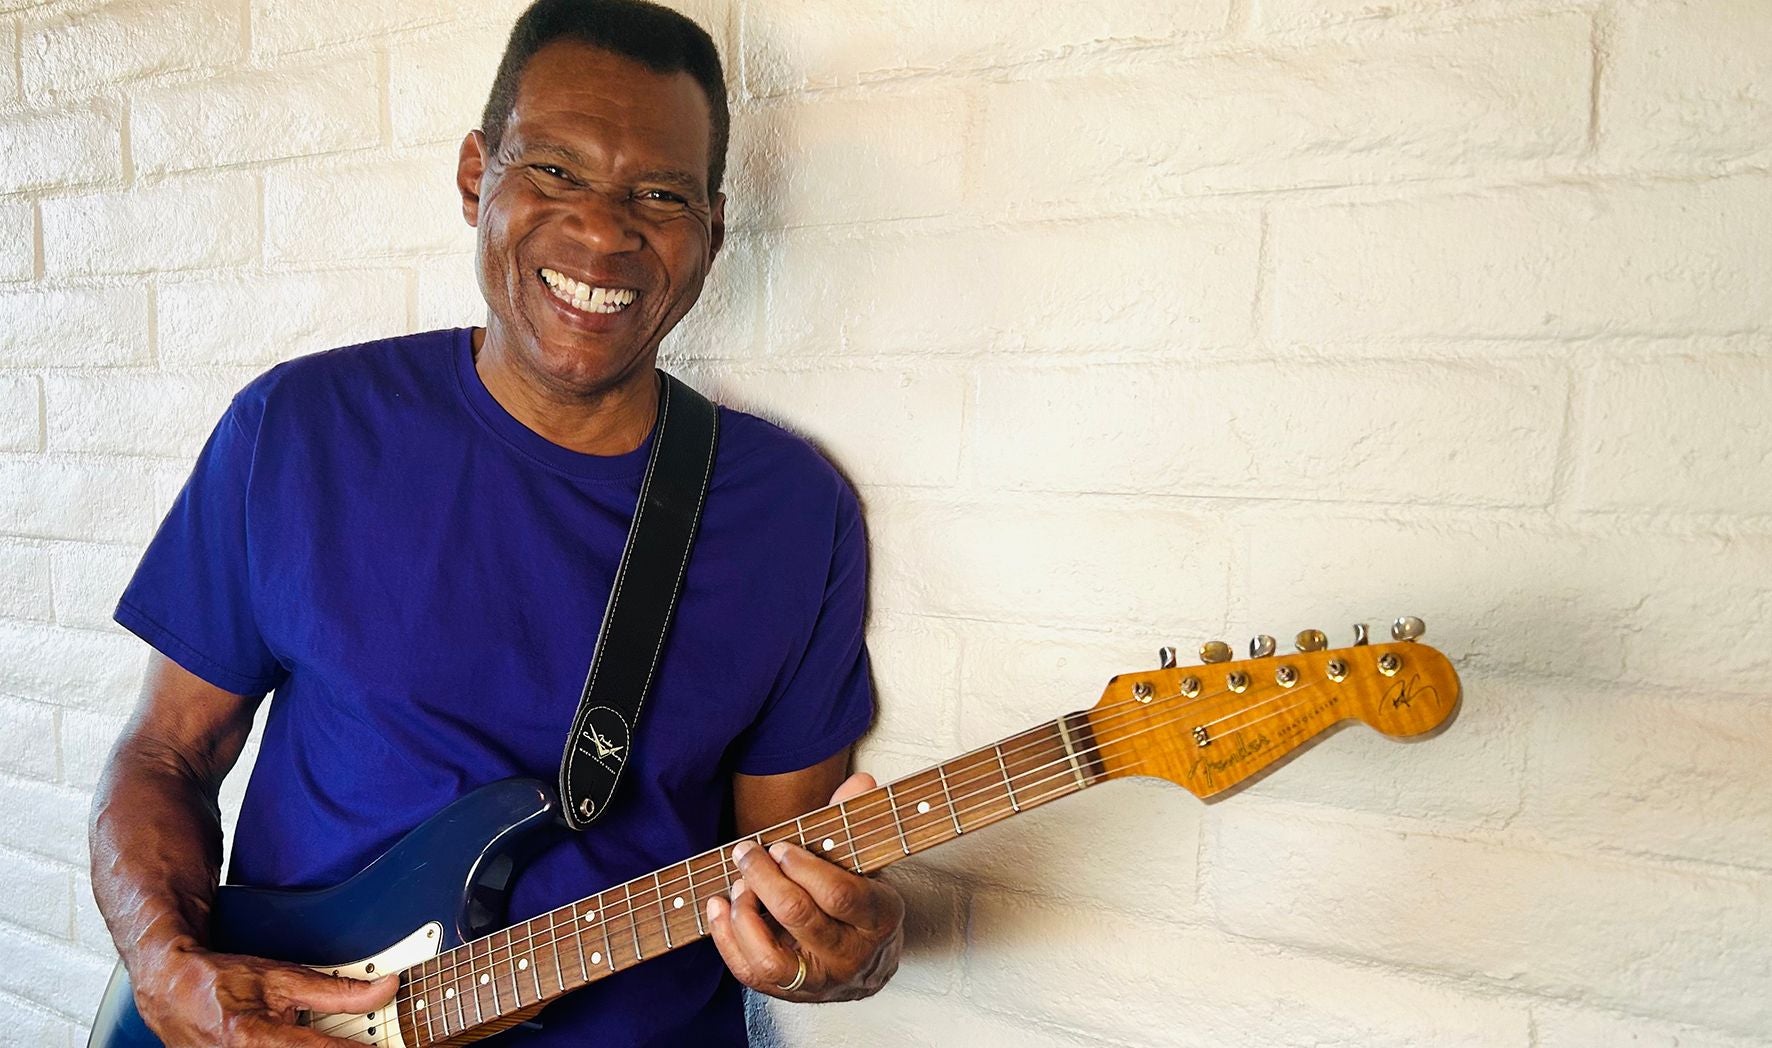 More Info for The Robert Cray Band